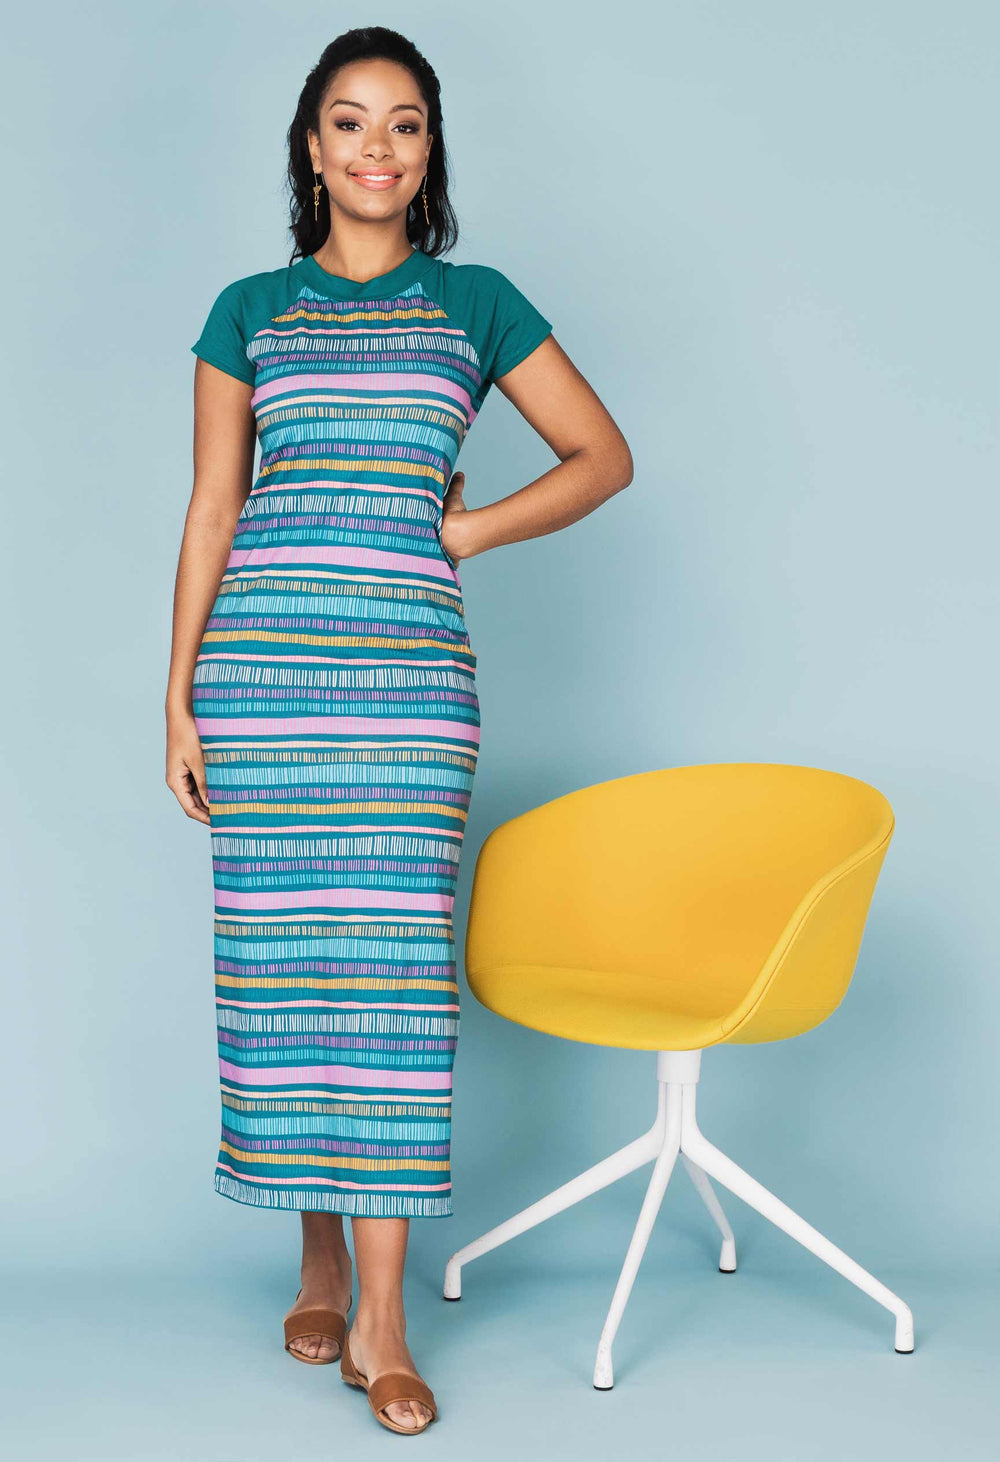 Woman wearing the Bellini Dress sewing pattern from Our Lady of Leisure on The Fold Line. A dress pattern made in jersey, double jersey or interlock fabrics, featuring short raglan sleeves, midi length, side slits, and crew neck.